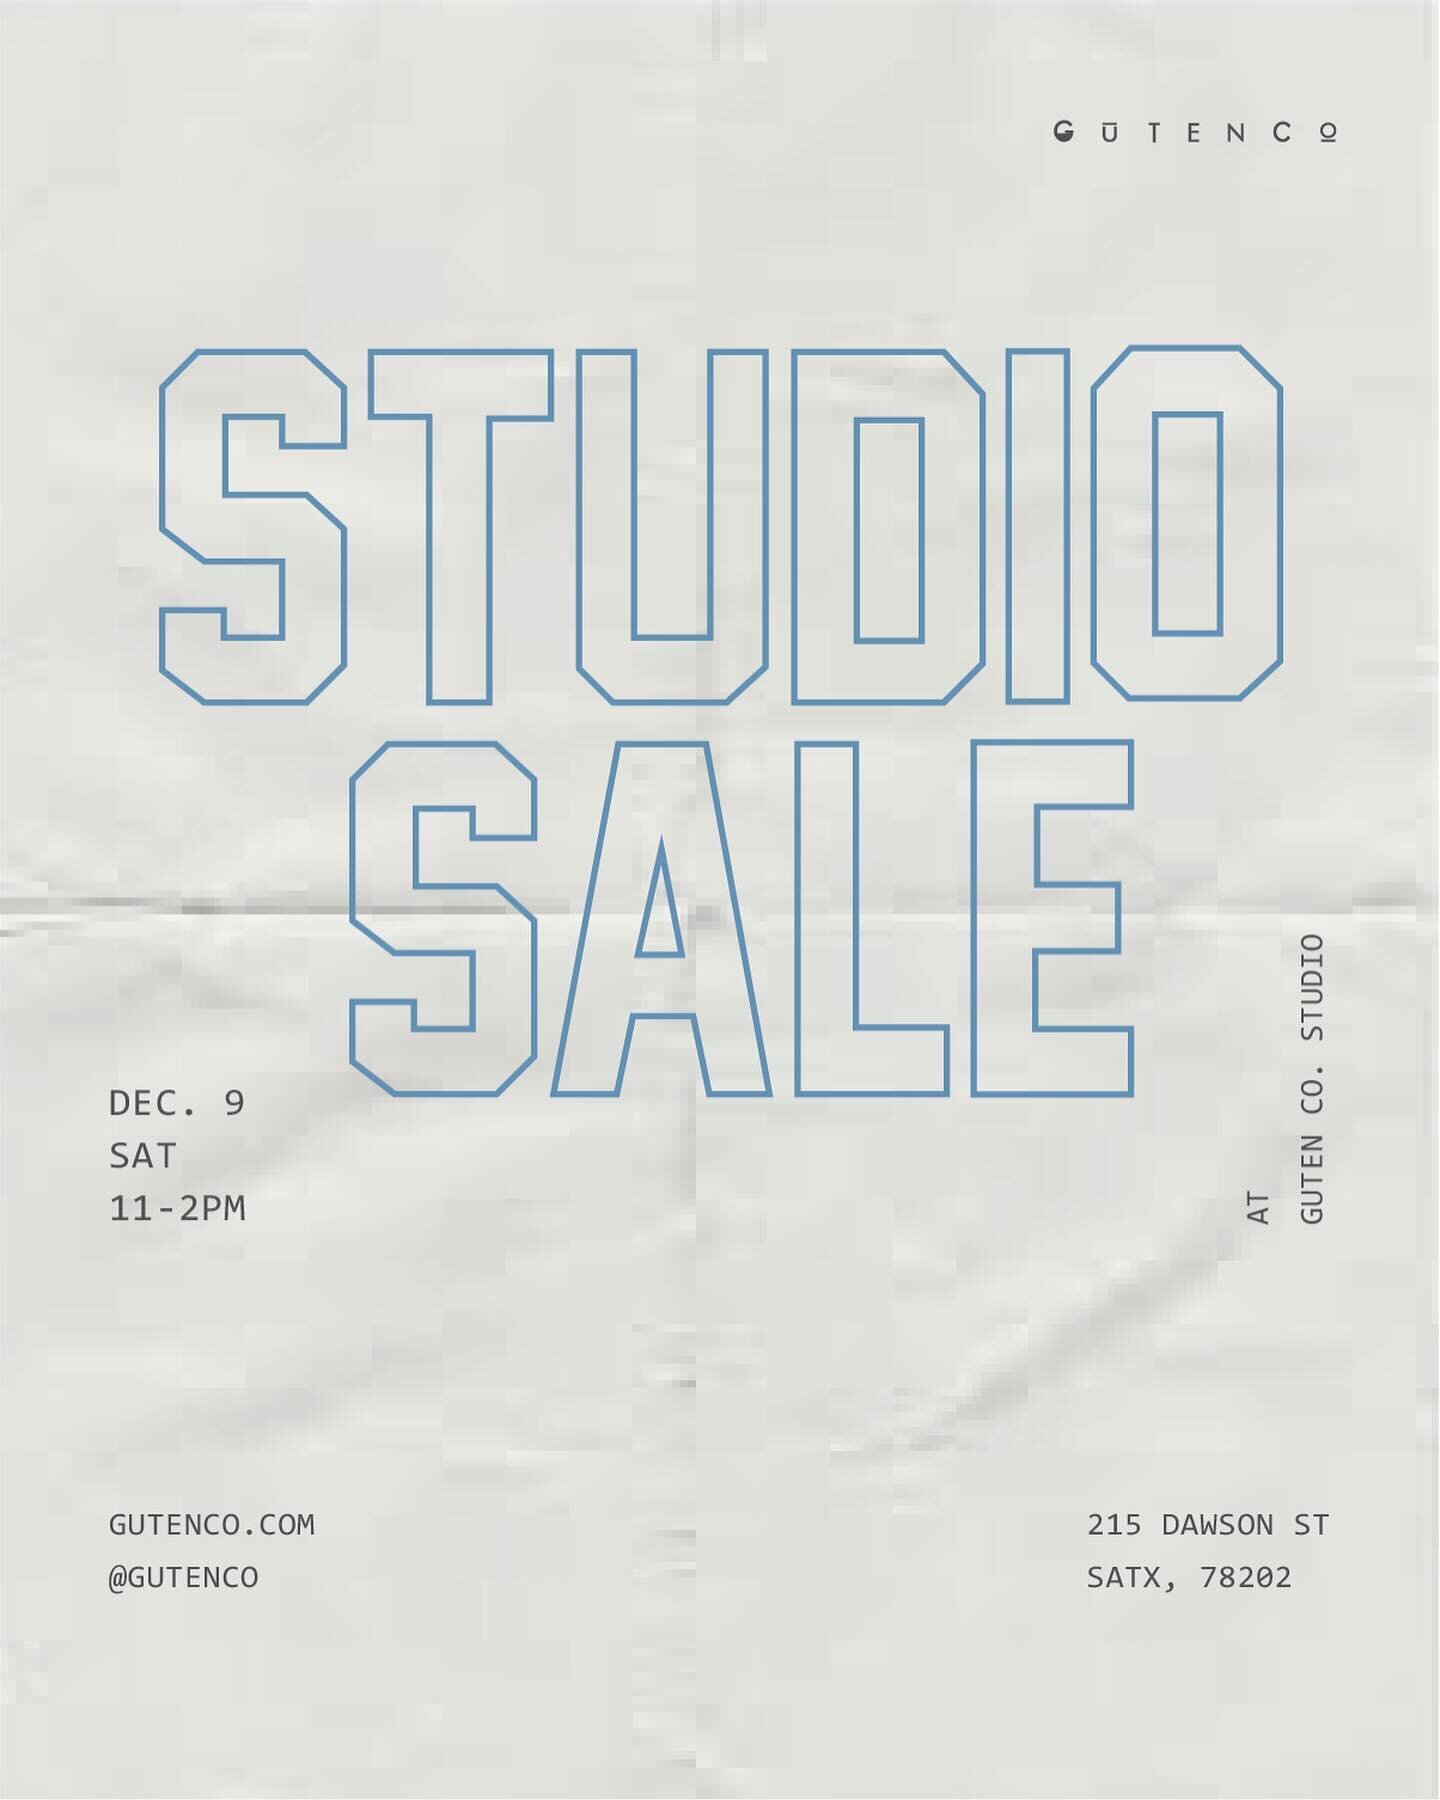 The time is here again! I&rsquo;ve had my busiest production year yet and I have loads of work to share. Come by the studio next Sat (Dec 9th) to visit and shop seconds, one-off pieces and get access to first batches of new designs that will be relea